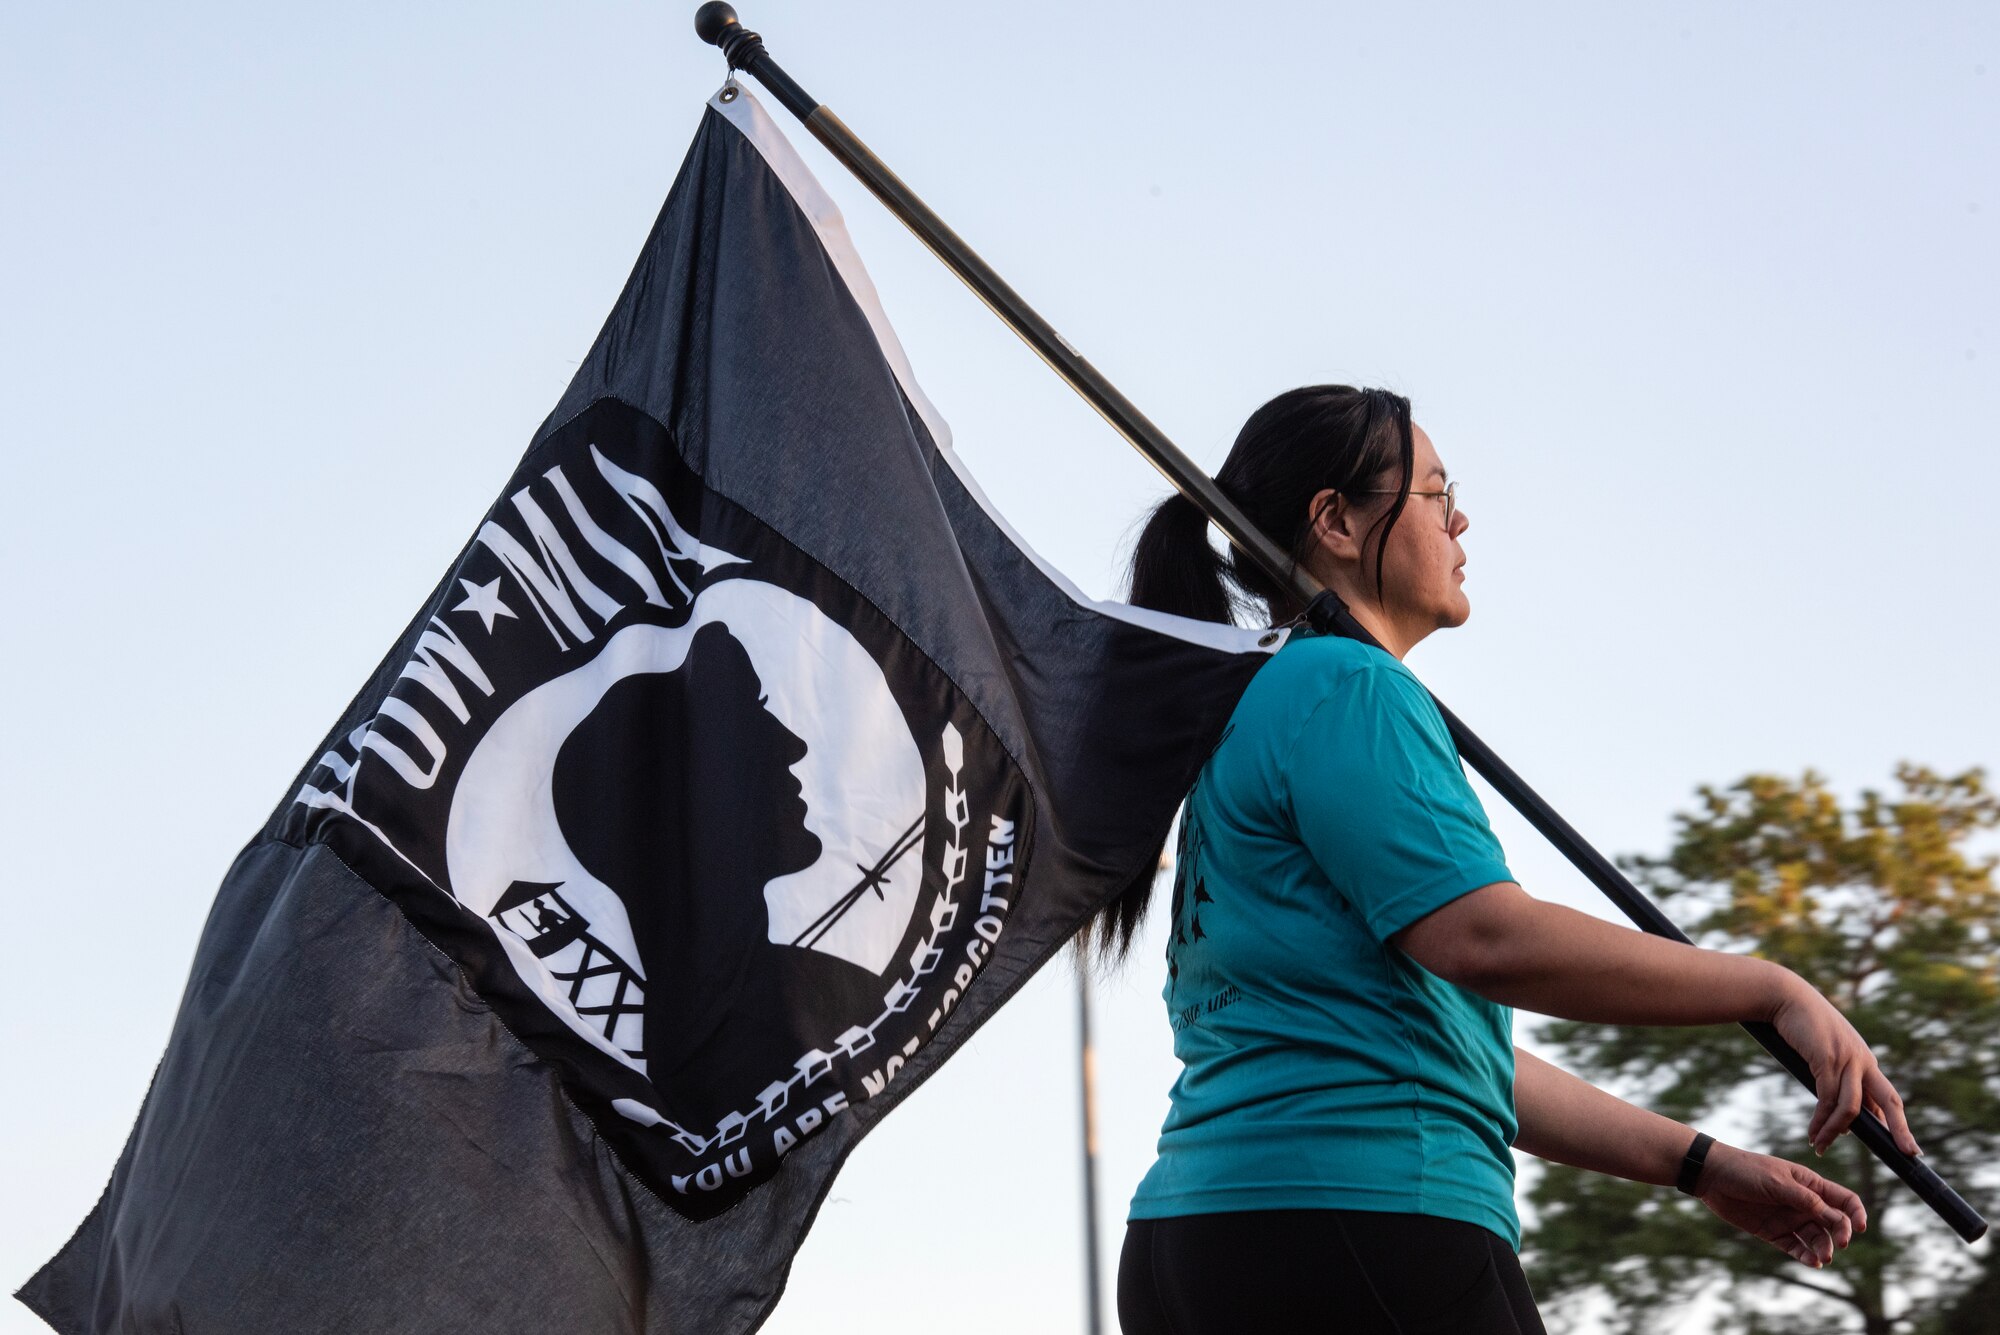 Staff Sgt. Consuelo Marahta, 4th Health Care Operations Squadron, carries the POW/MIA flag during a 24-hour vigil event as part of POW/MIA Recognition Day at Seymour Johnson Air Force Base, North Carolina, Sept. 15, 2023.